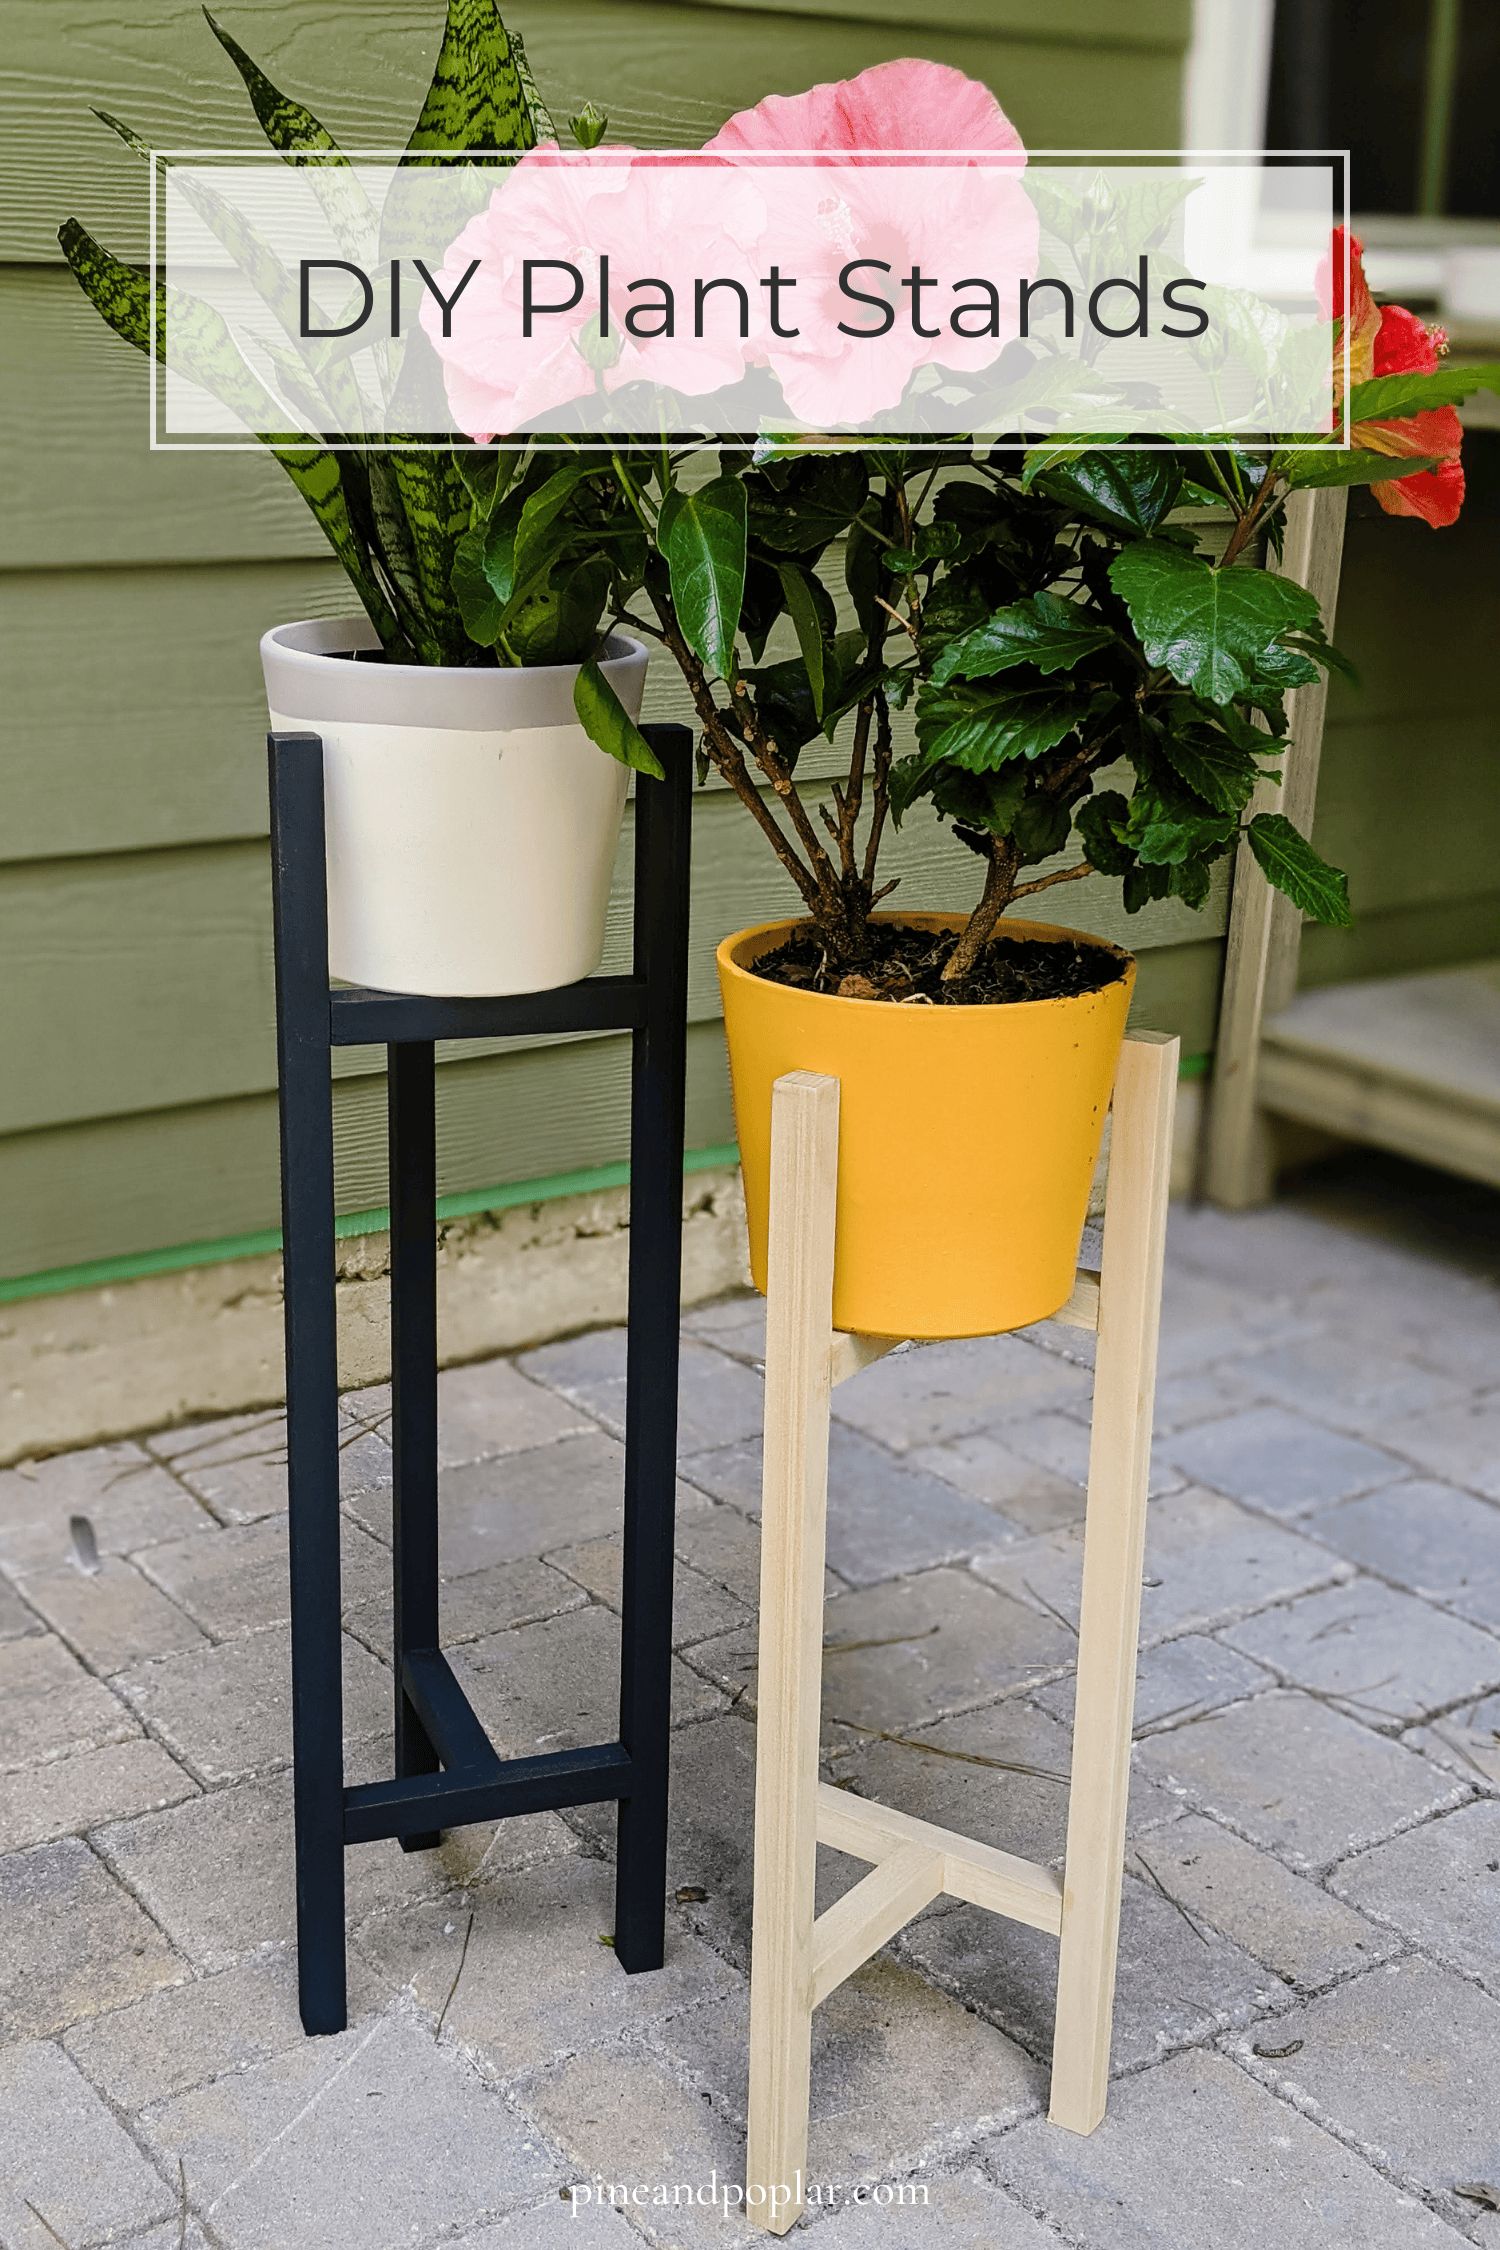 The Easiest Diy Plant Stand Plans Intended For Deluxe Plant Stands (View 11 of 15)